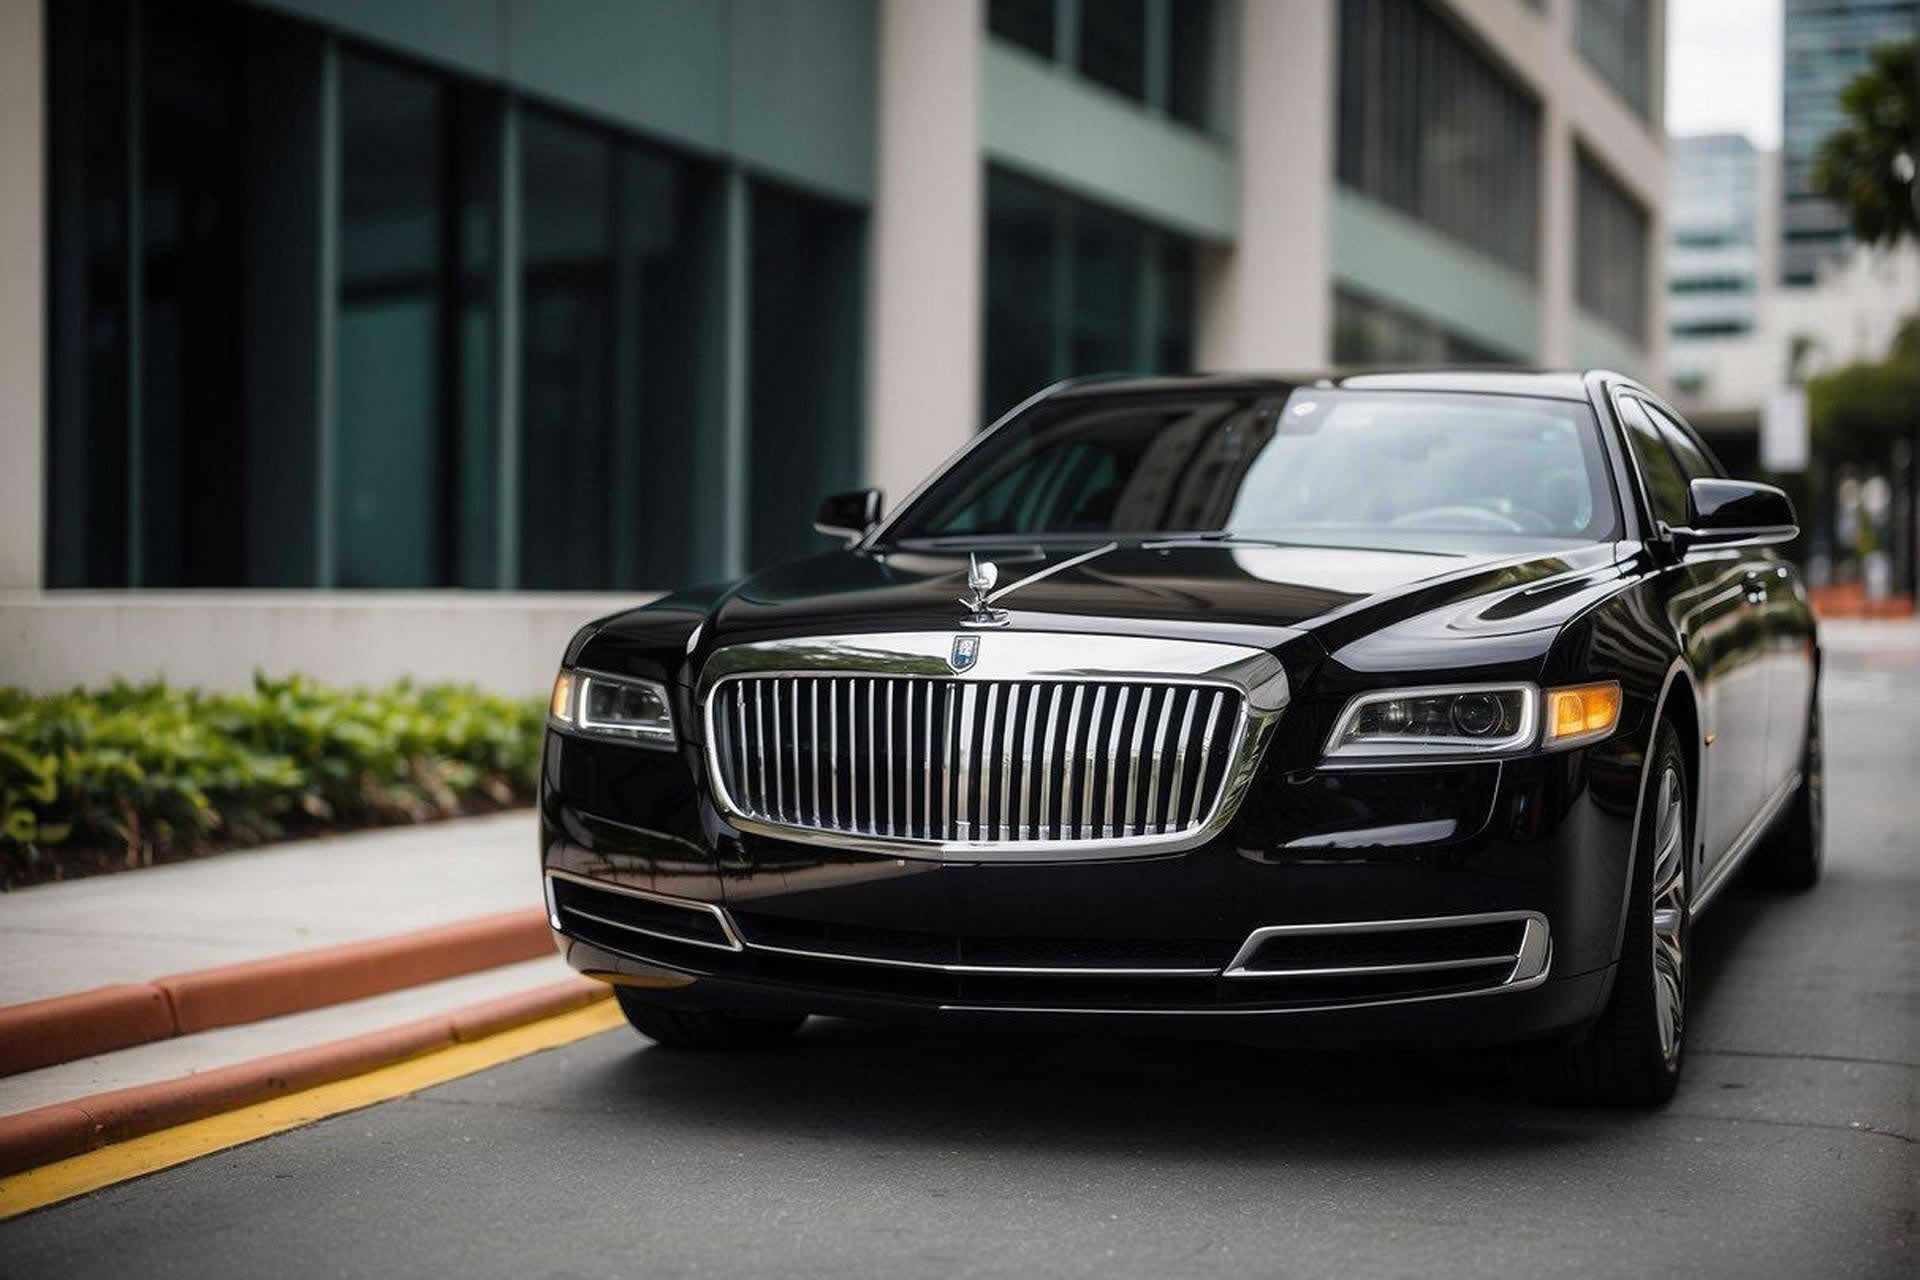 A sleek black limousine pulls up to a modern office building in downtown San Diego, waiting to transport corporate executives in style